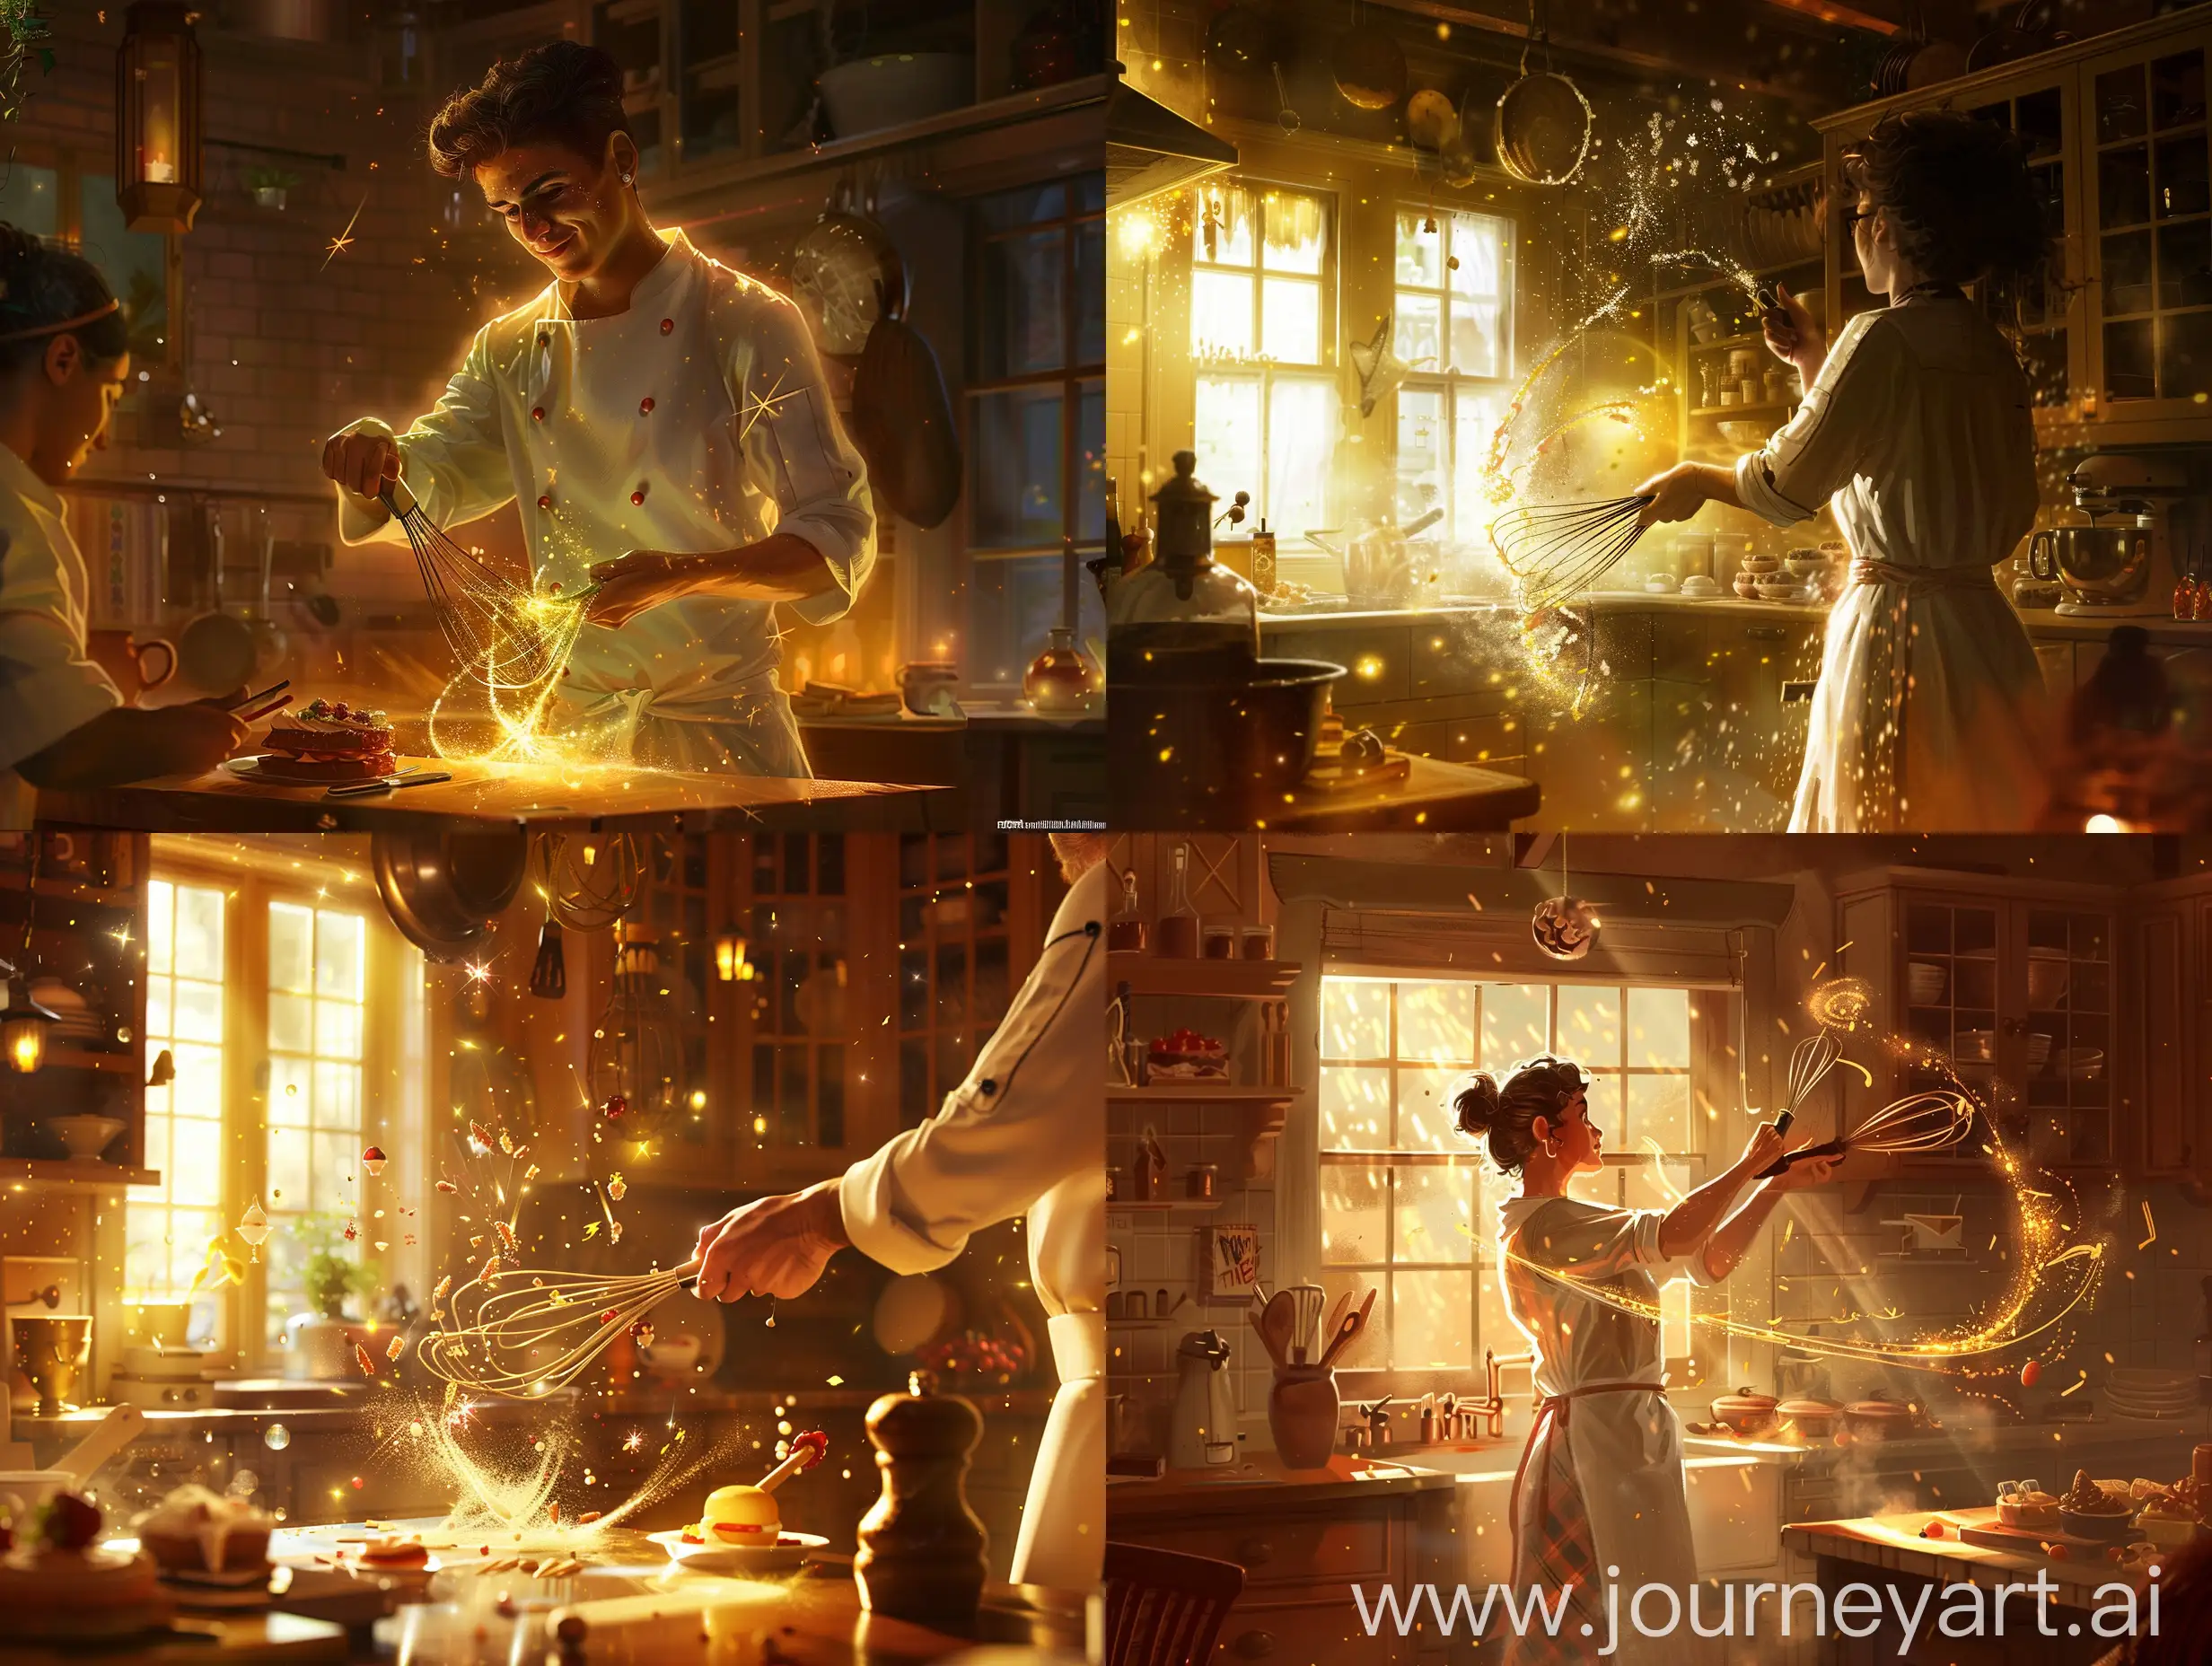 Imagine a cozy kitchen bathed in a warm, inviting hue. In this delightful setting, a talented chef wields a whisk with finesse, captivating the audience with the art of culinary magic. With each graceful movement, the whisk becomes an extension of the chef's imagination, as if casting spells in the air. As the desserts take flight, the room fills with a sense of wonder and anticipation. The onlookers are spellbound, their eyes wide with awe and excitement, as they witness this enchanting performance. Amidst the soothing ambiance of the kitchen, the chef's culinary sorcery creates a truly magical experience for all fortunate enough to be present.